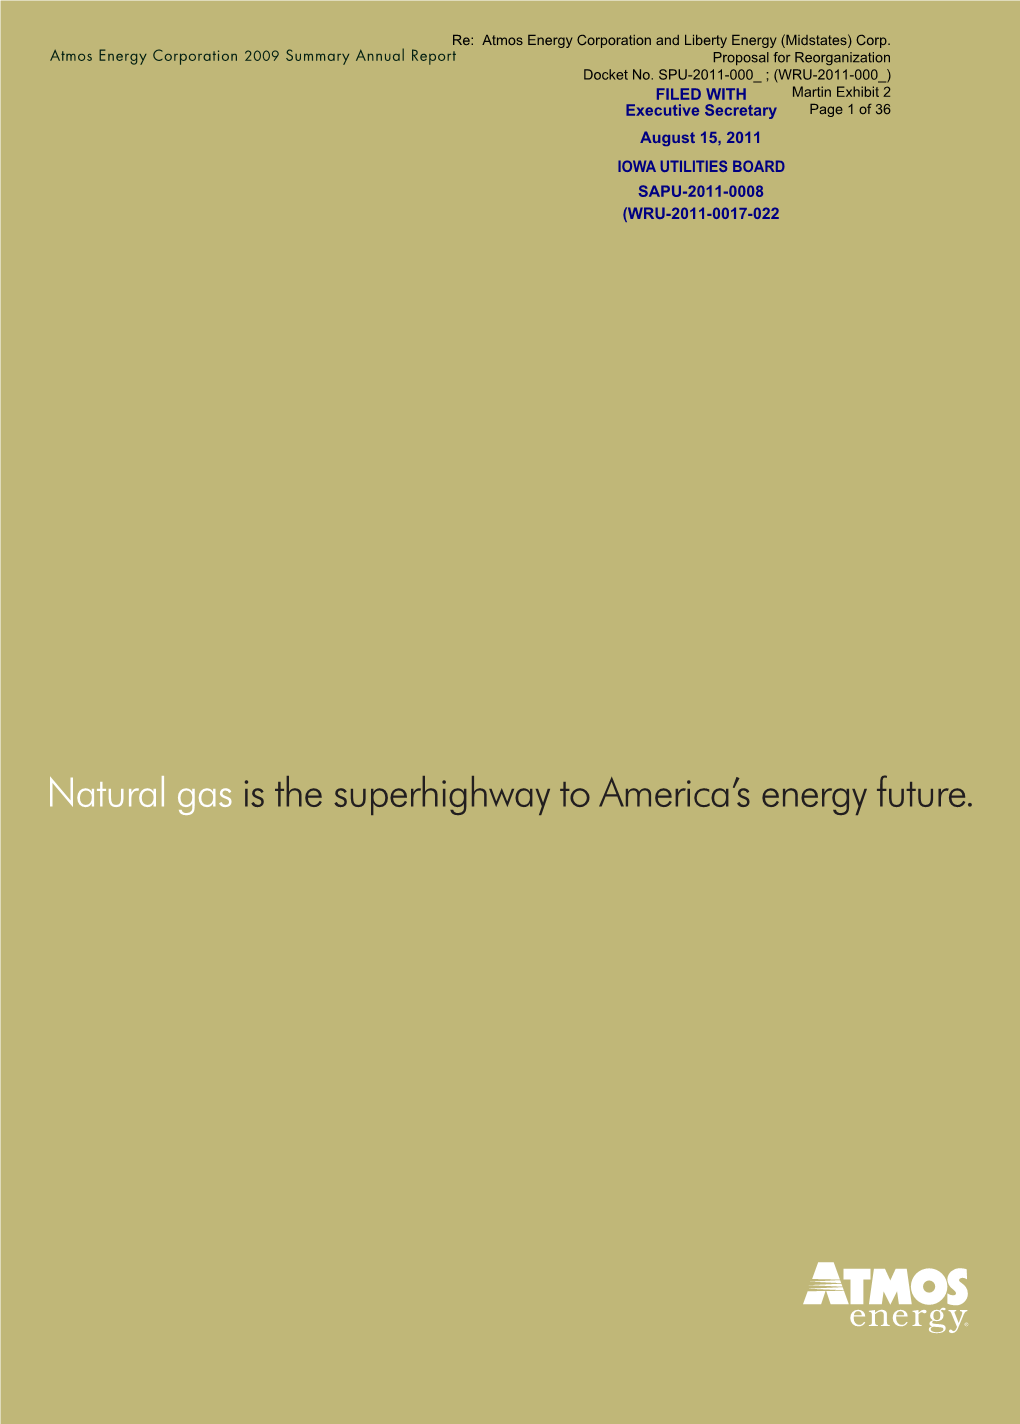 Natural Gas Is the Superhighway to America's Energy Future